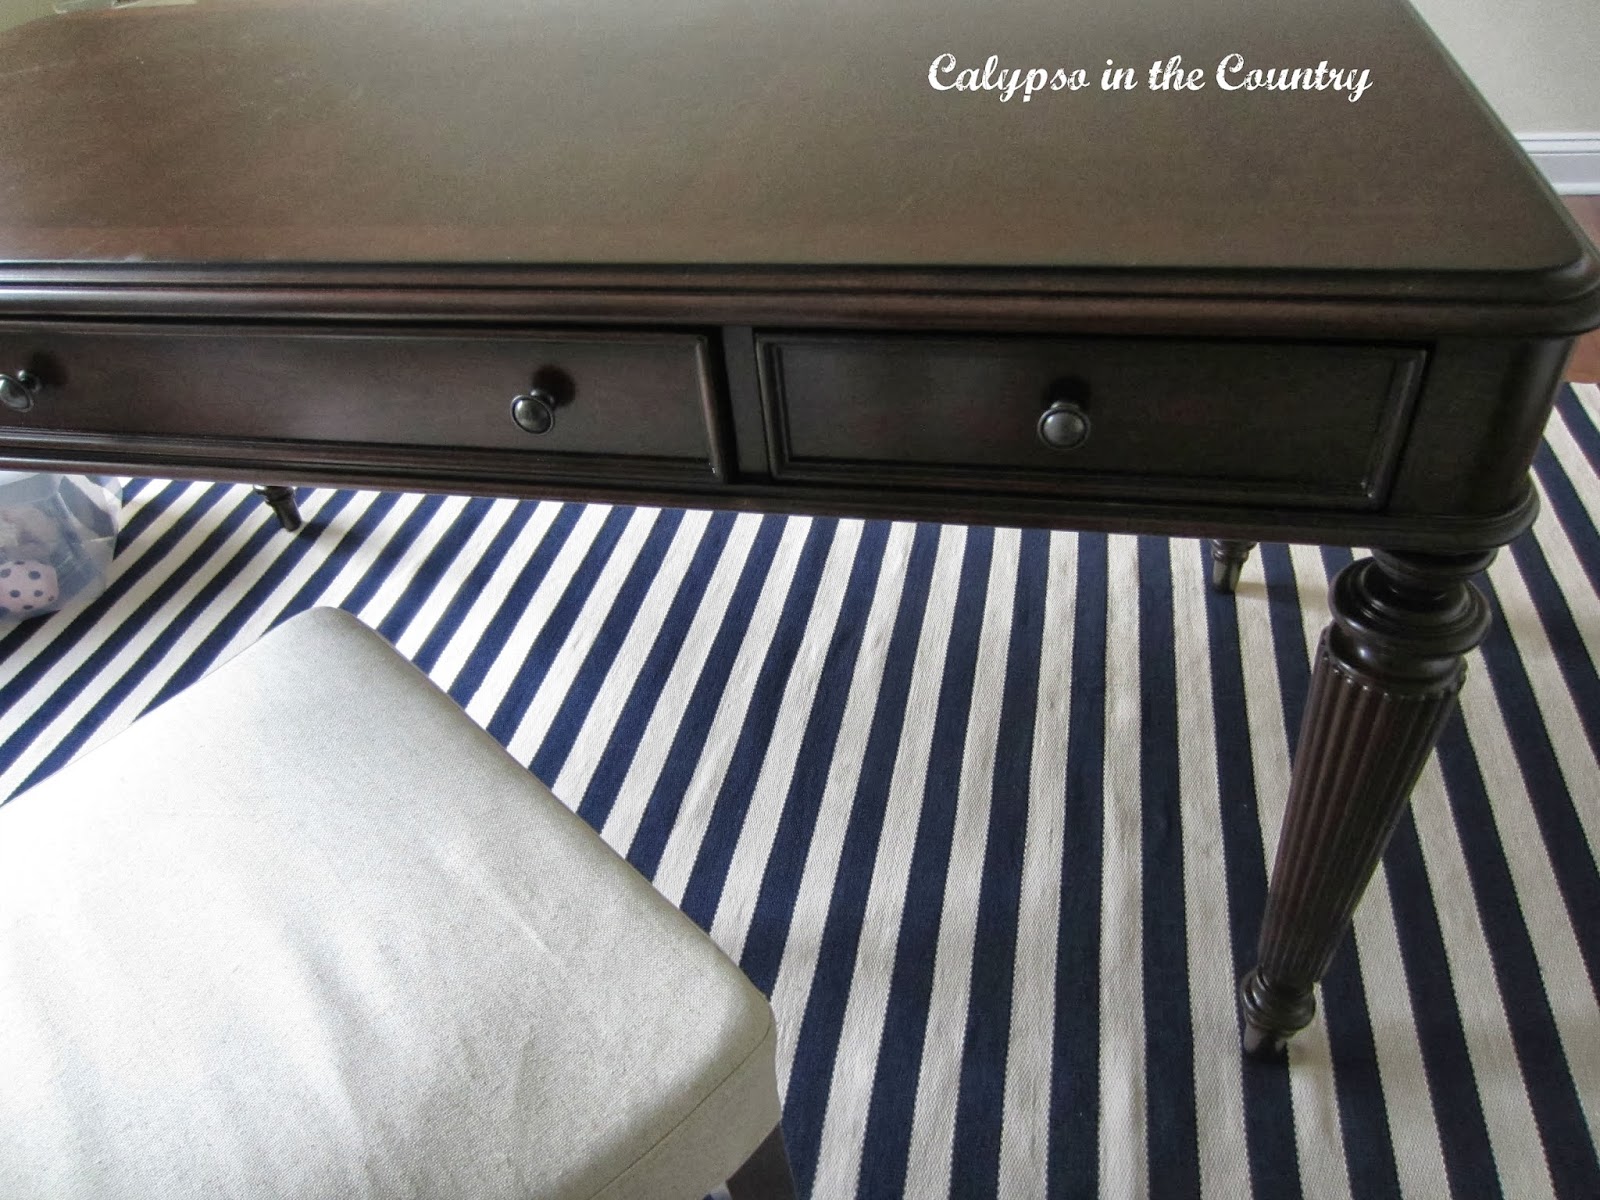 Desk and blue and white striped rug - inspired by Something's Gotta Give movie